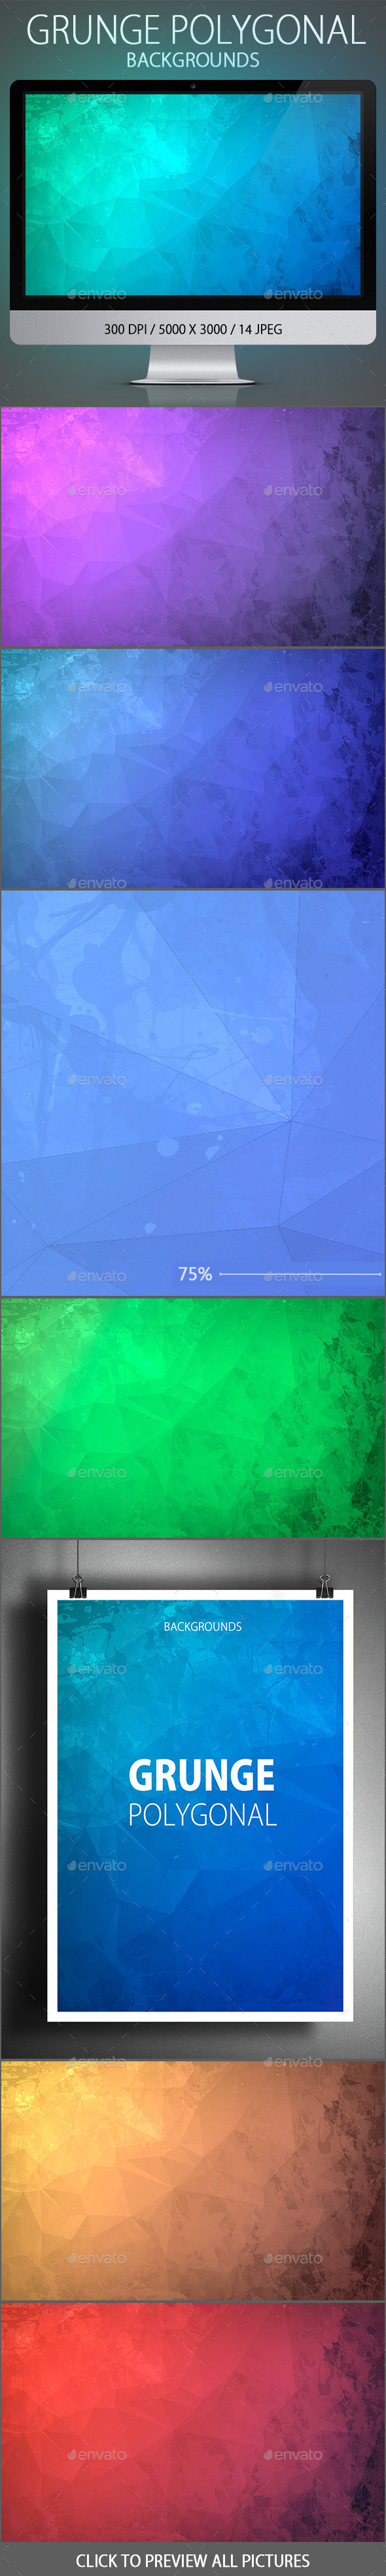 Title grunge poly backgrounds